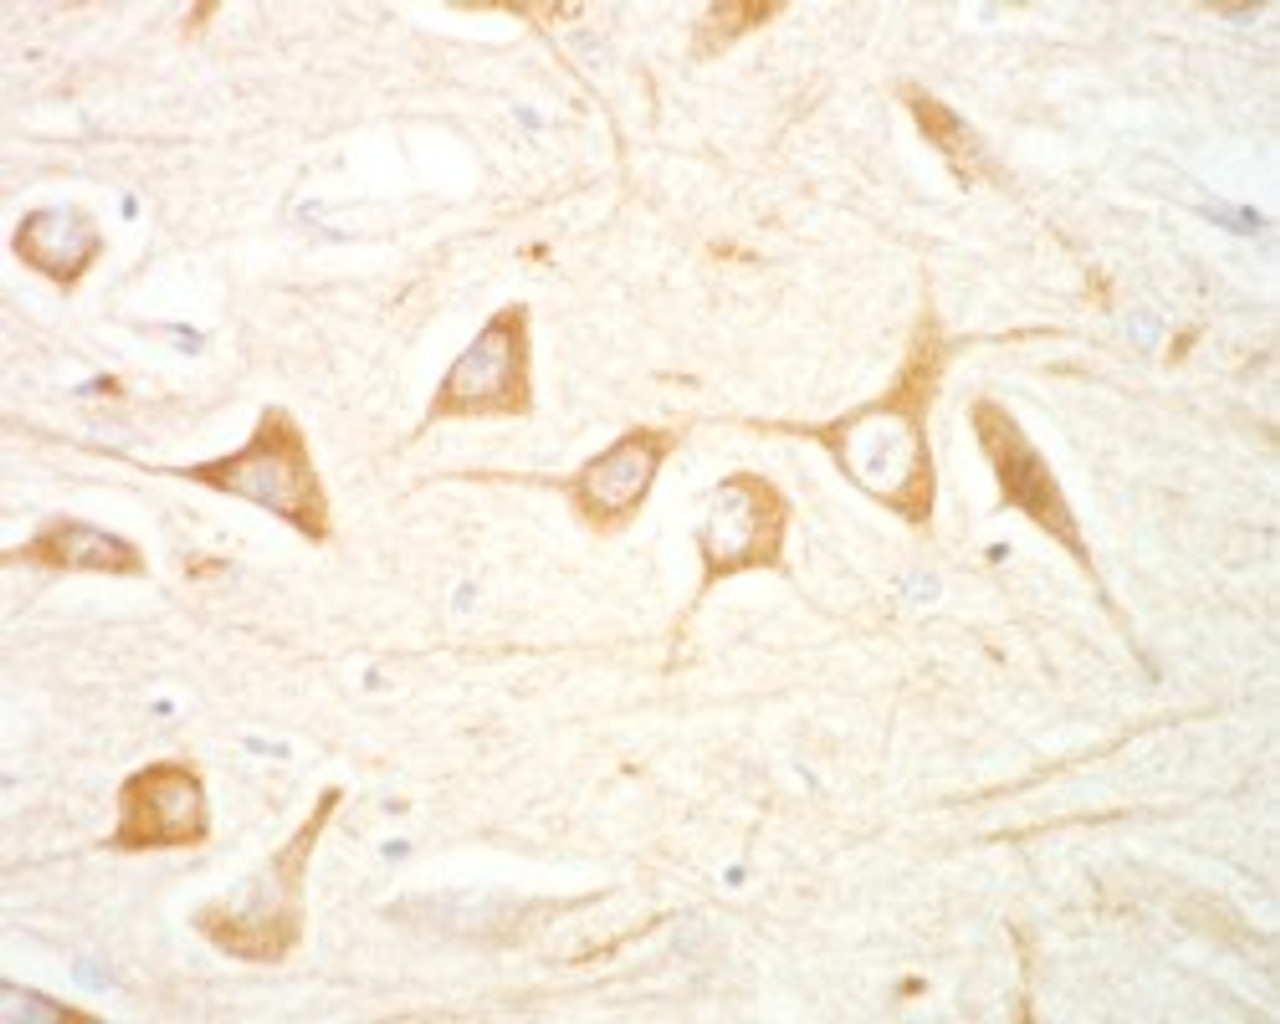 45-848 (1.5ug/ml) staining of paraffin embedded Human Hippocampus CA4. Microwaved antigen retrieval with citrate buffer pH 6, HRP-staining. <strong>This data is from a previous batch, not on sale.</strong>